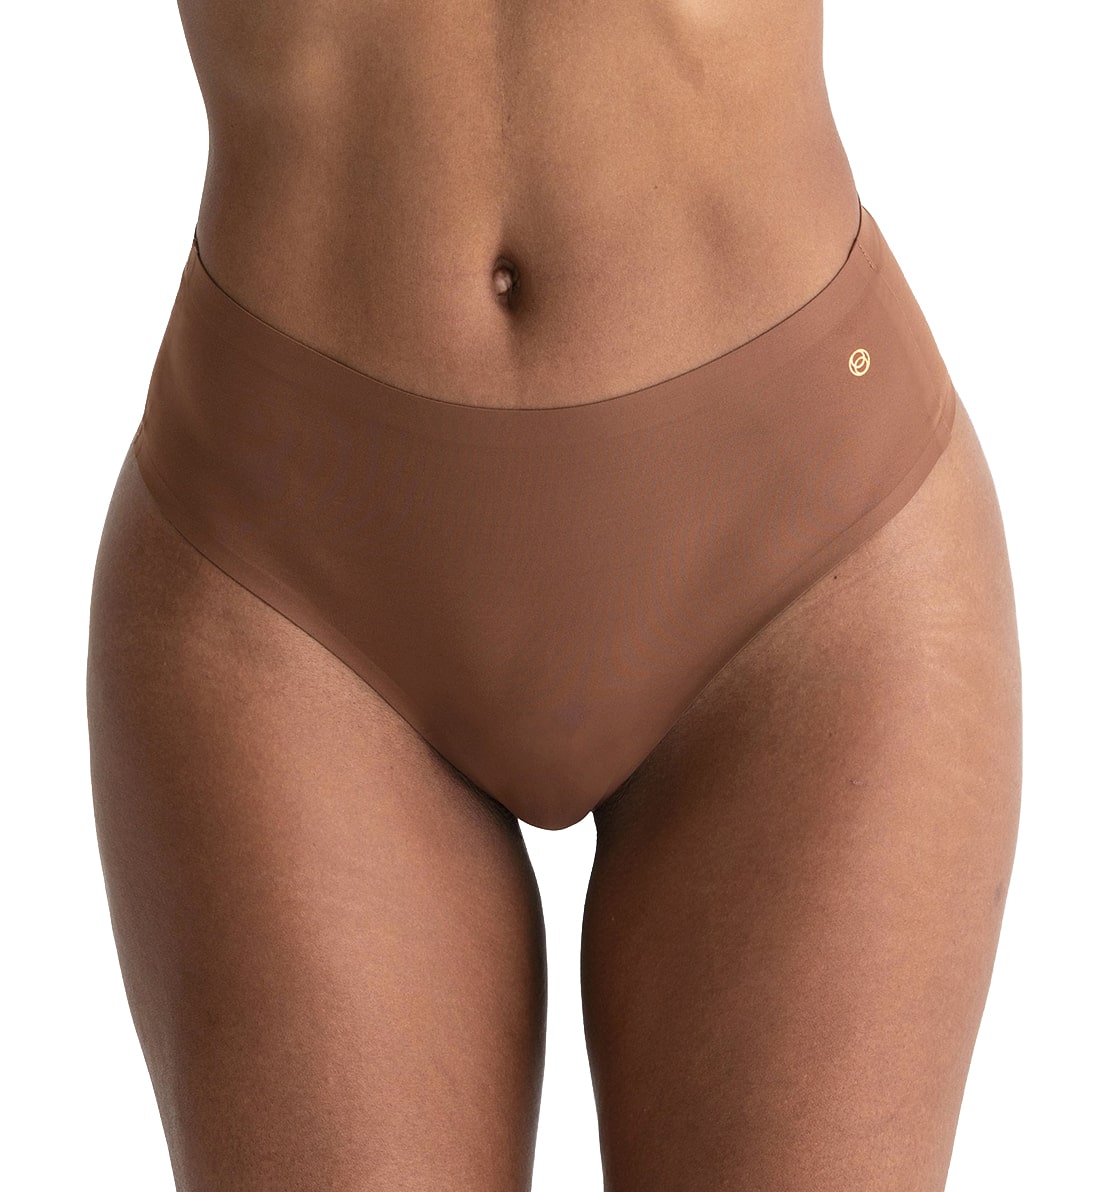 Evelyn & Bobbie High-Waisted Thong (1703/1709),US 0-14,Clay - Clay,US 0 - 14